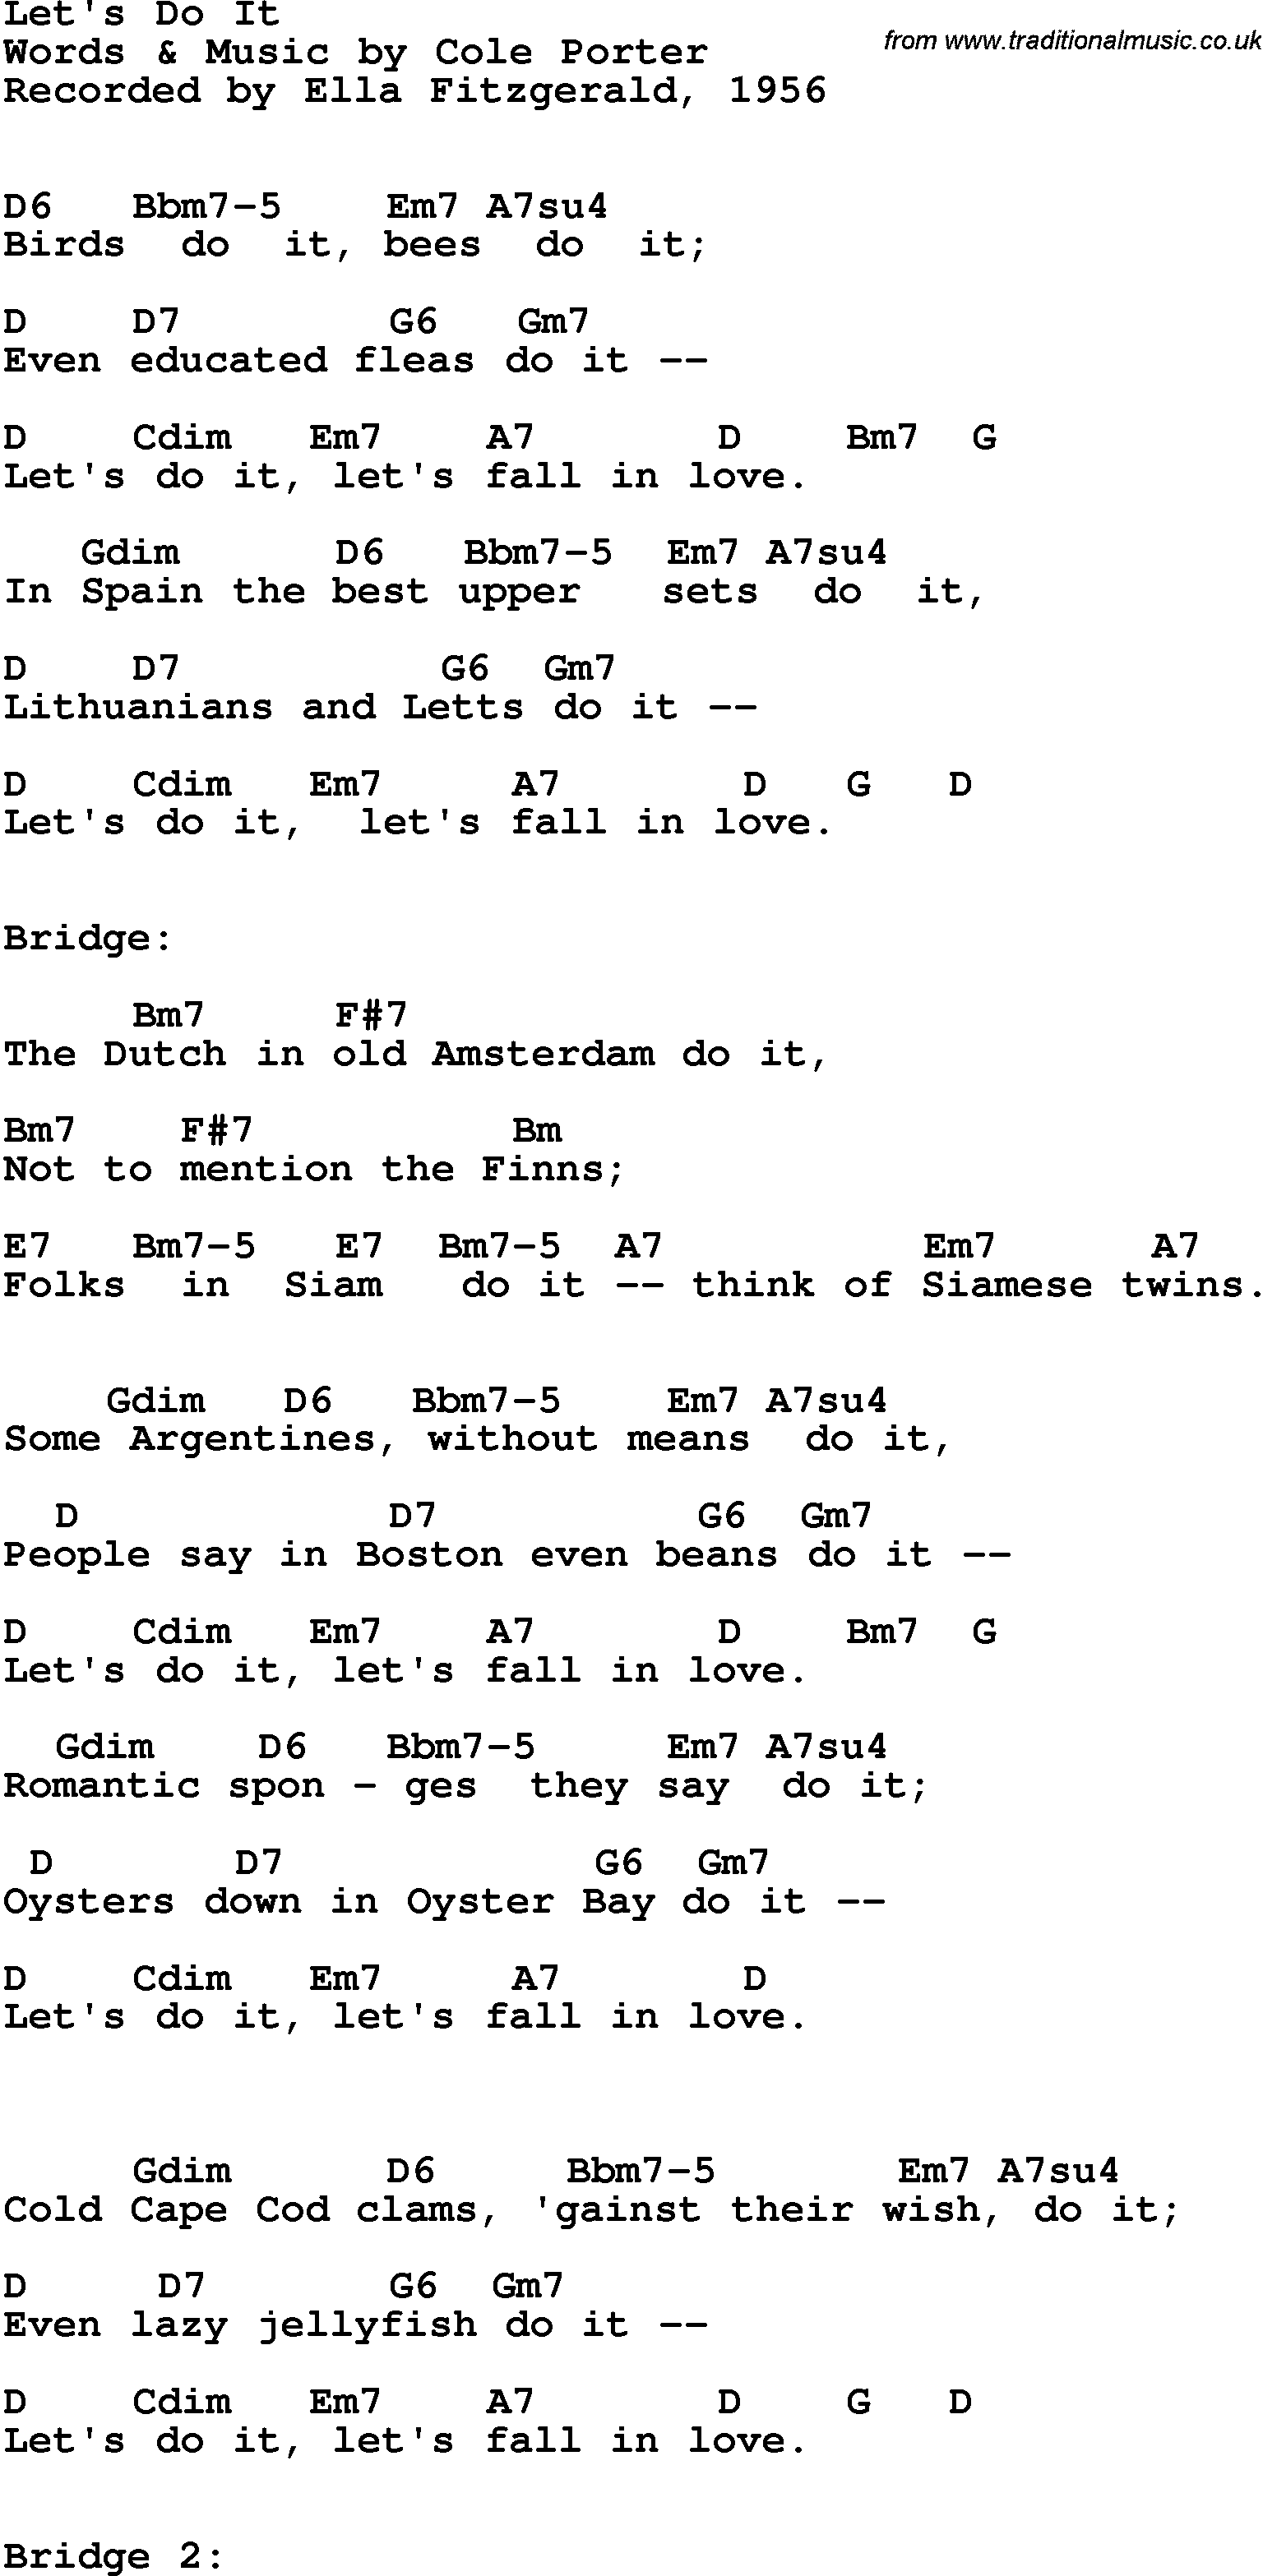 Song Lyrics with guitar chords for Let's Do It - Ella Fitzgerald, 1956